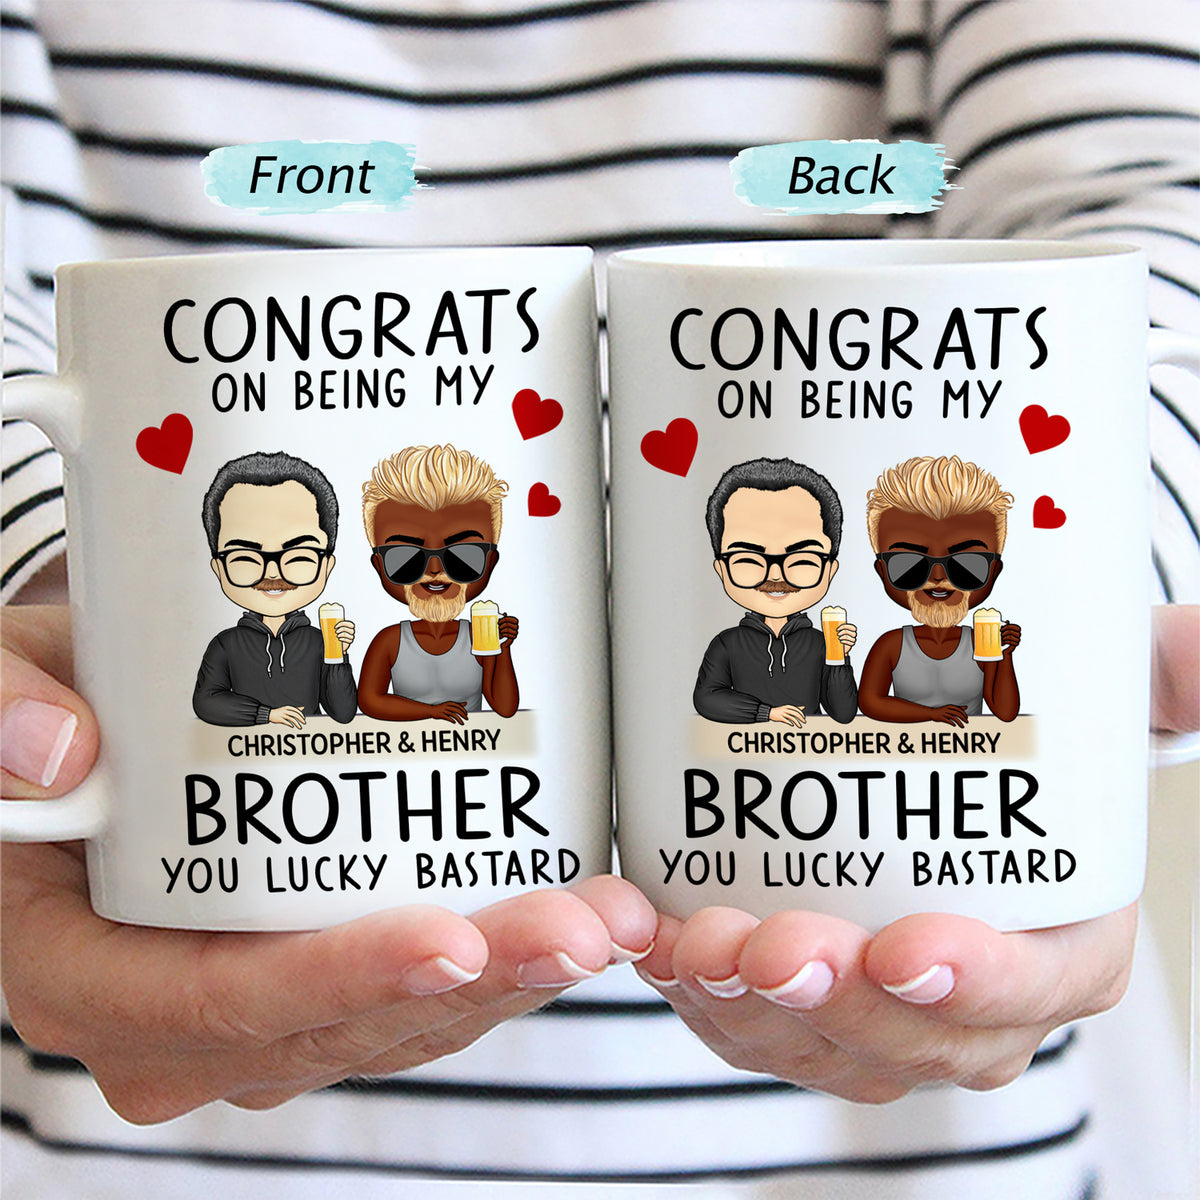 Congrats On Being My Sibling - Personalized 30oz Tumbler With